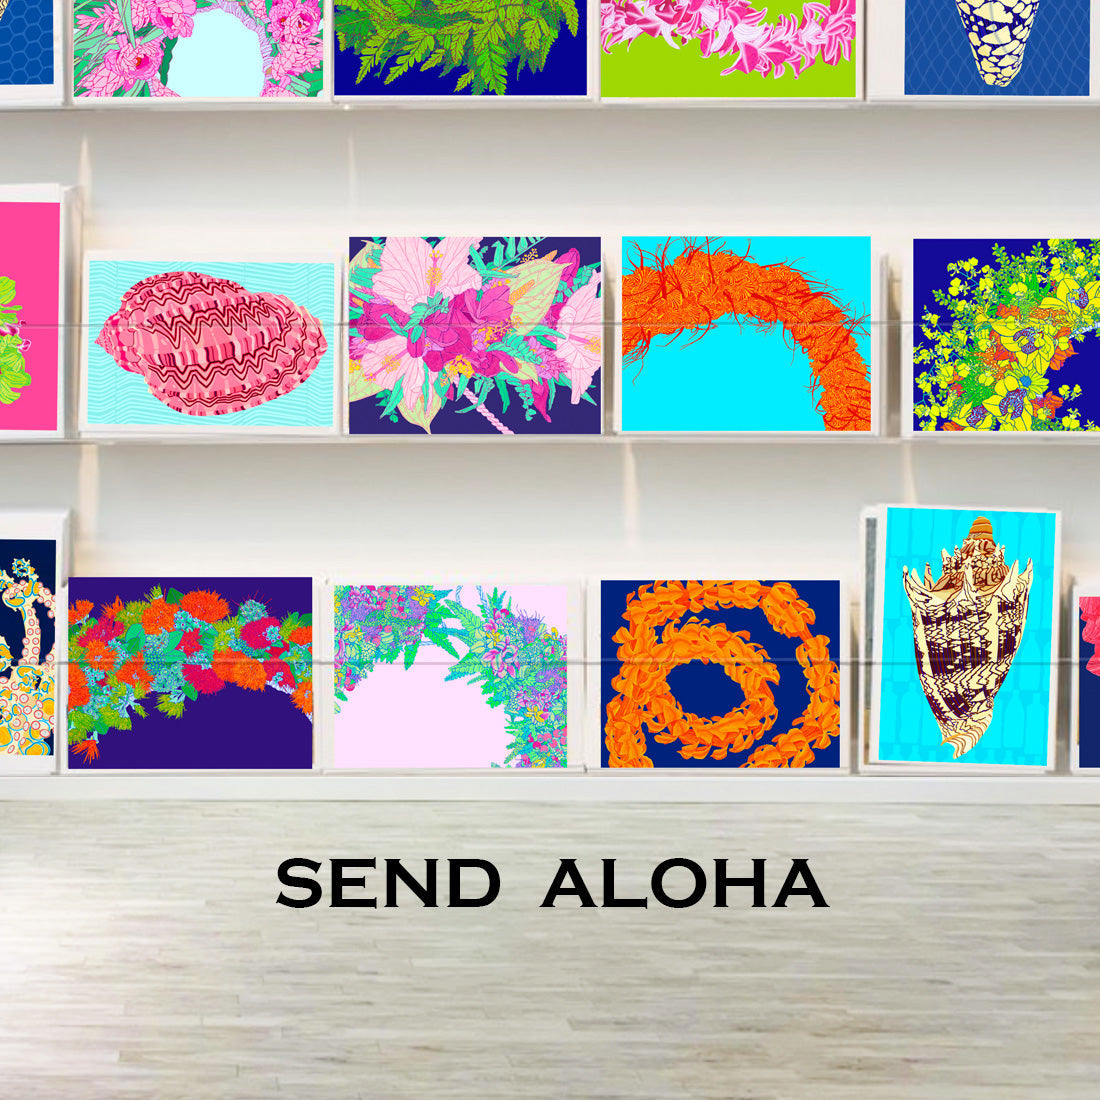 Judd Boloker Hawaiian Notecards - All Greeting Cards depicting Lei Flowers and Art Shell are Made in Hawaii 